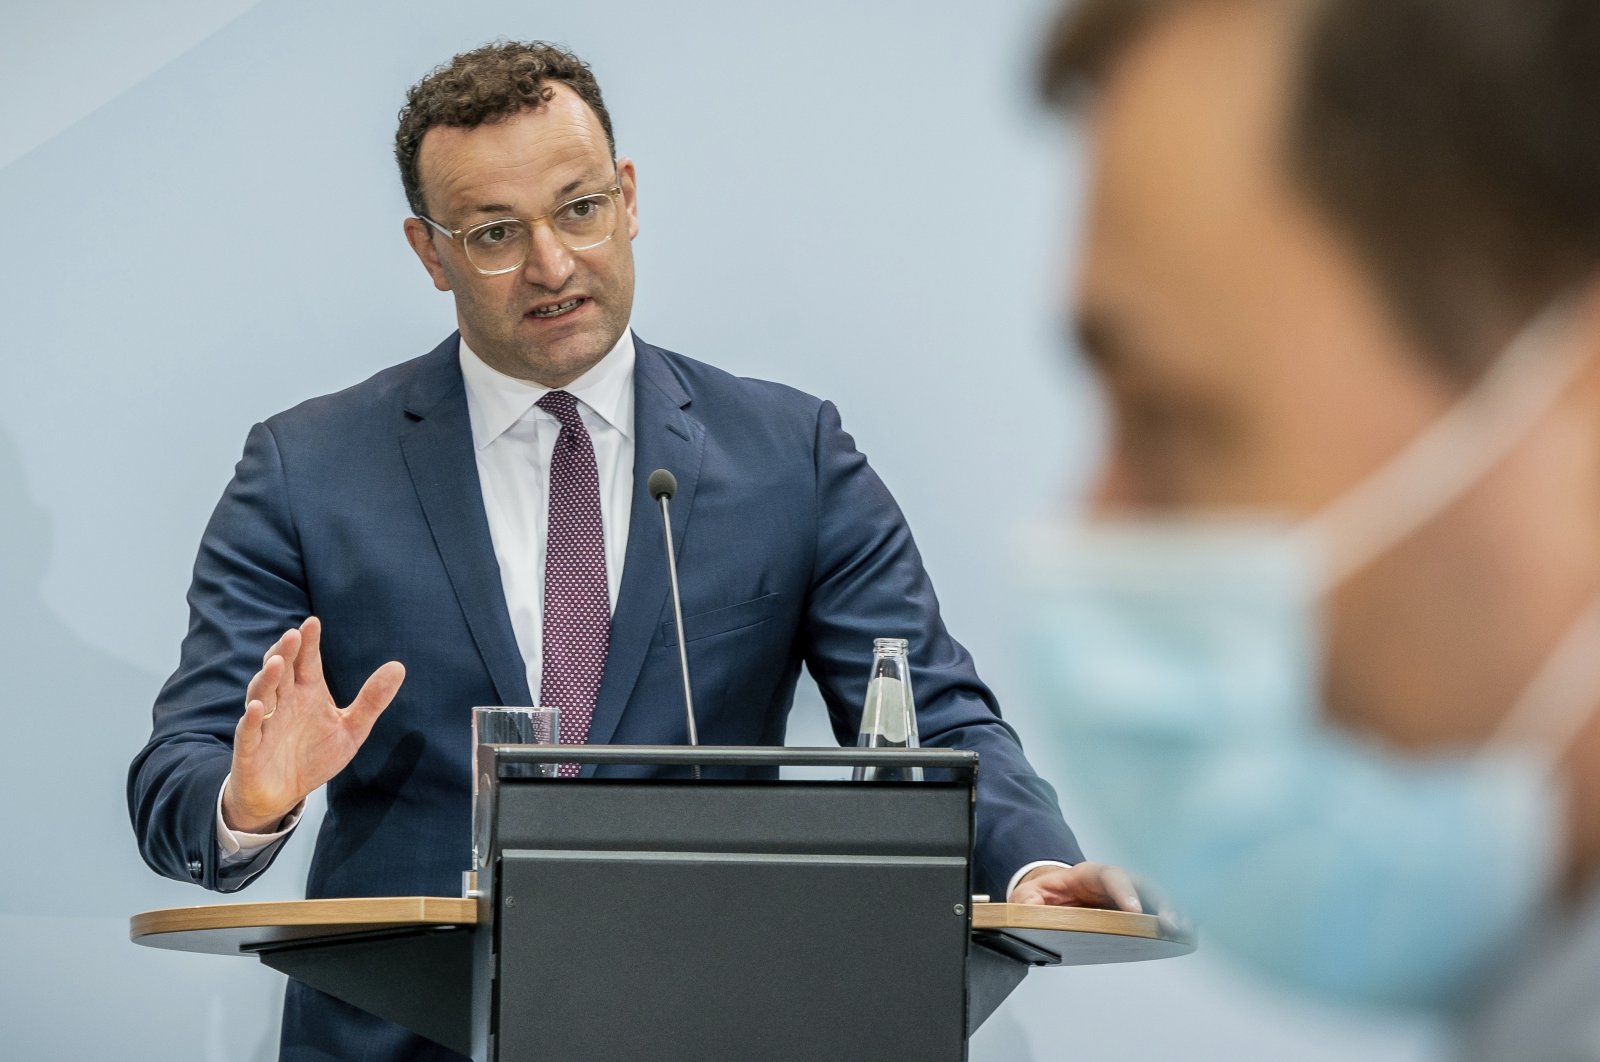 Jens Spahn, federal minister of health, gives a press conference at the Federal Ministry of Health in Berlin, Germany, Aug. 26, 2020. (AP Photo)